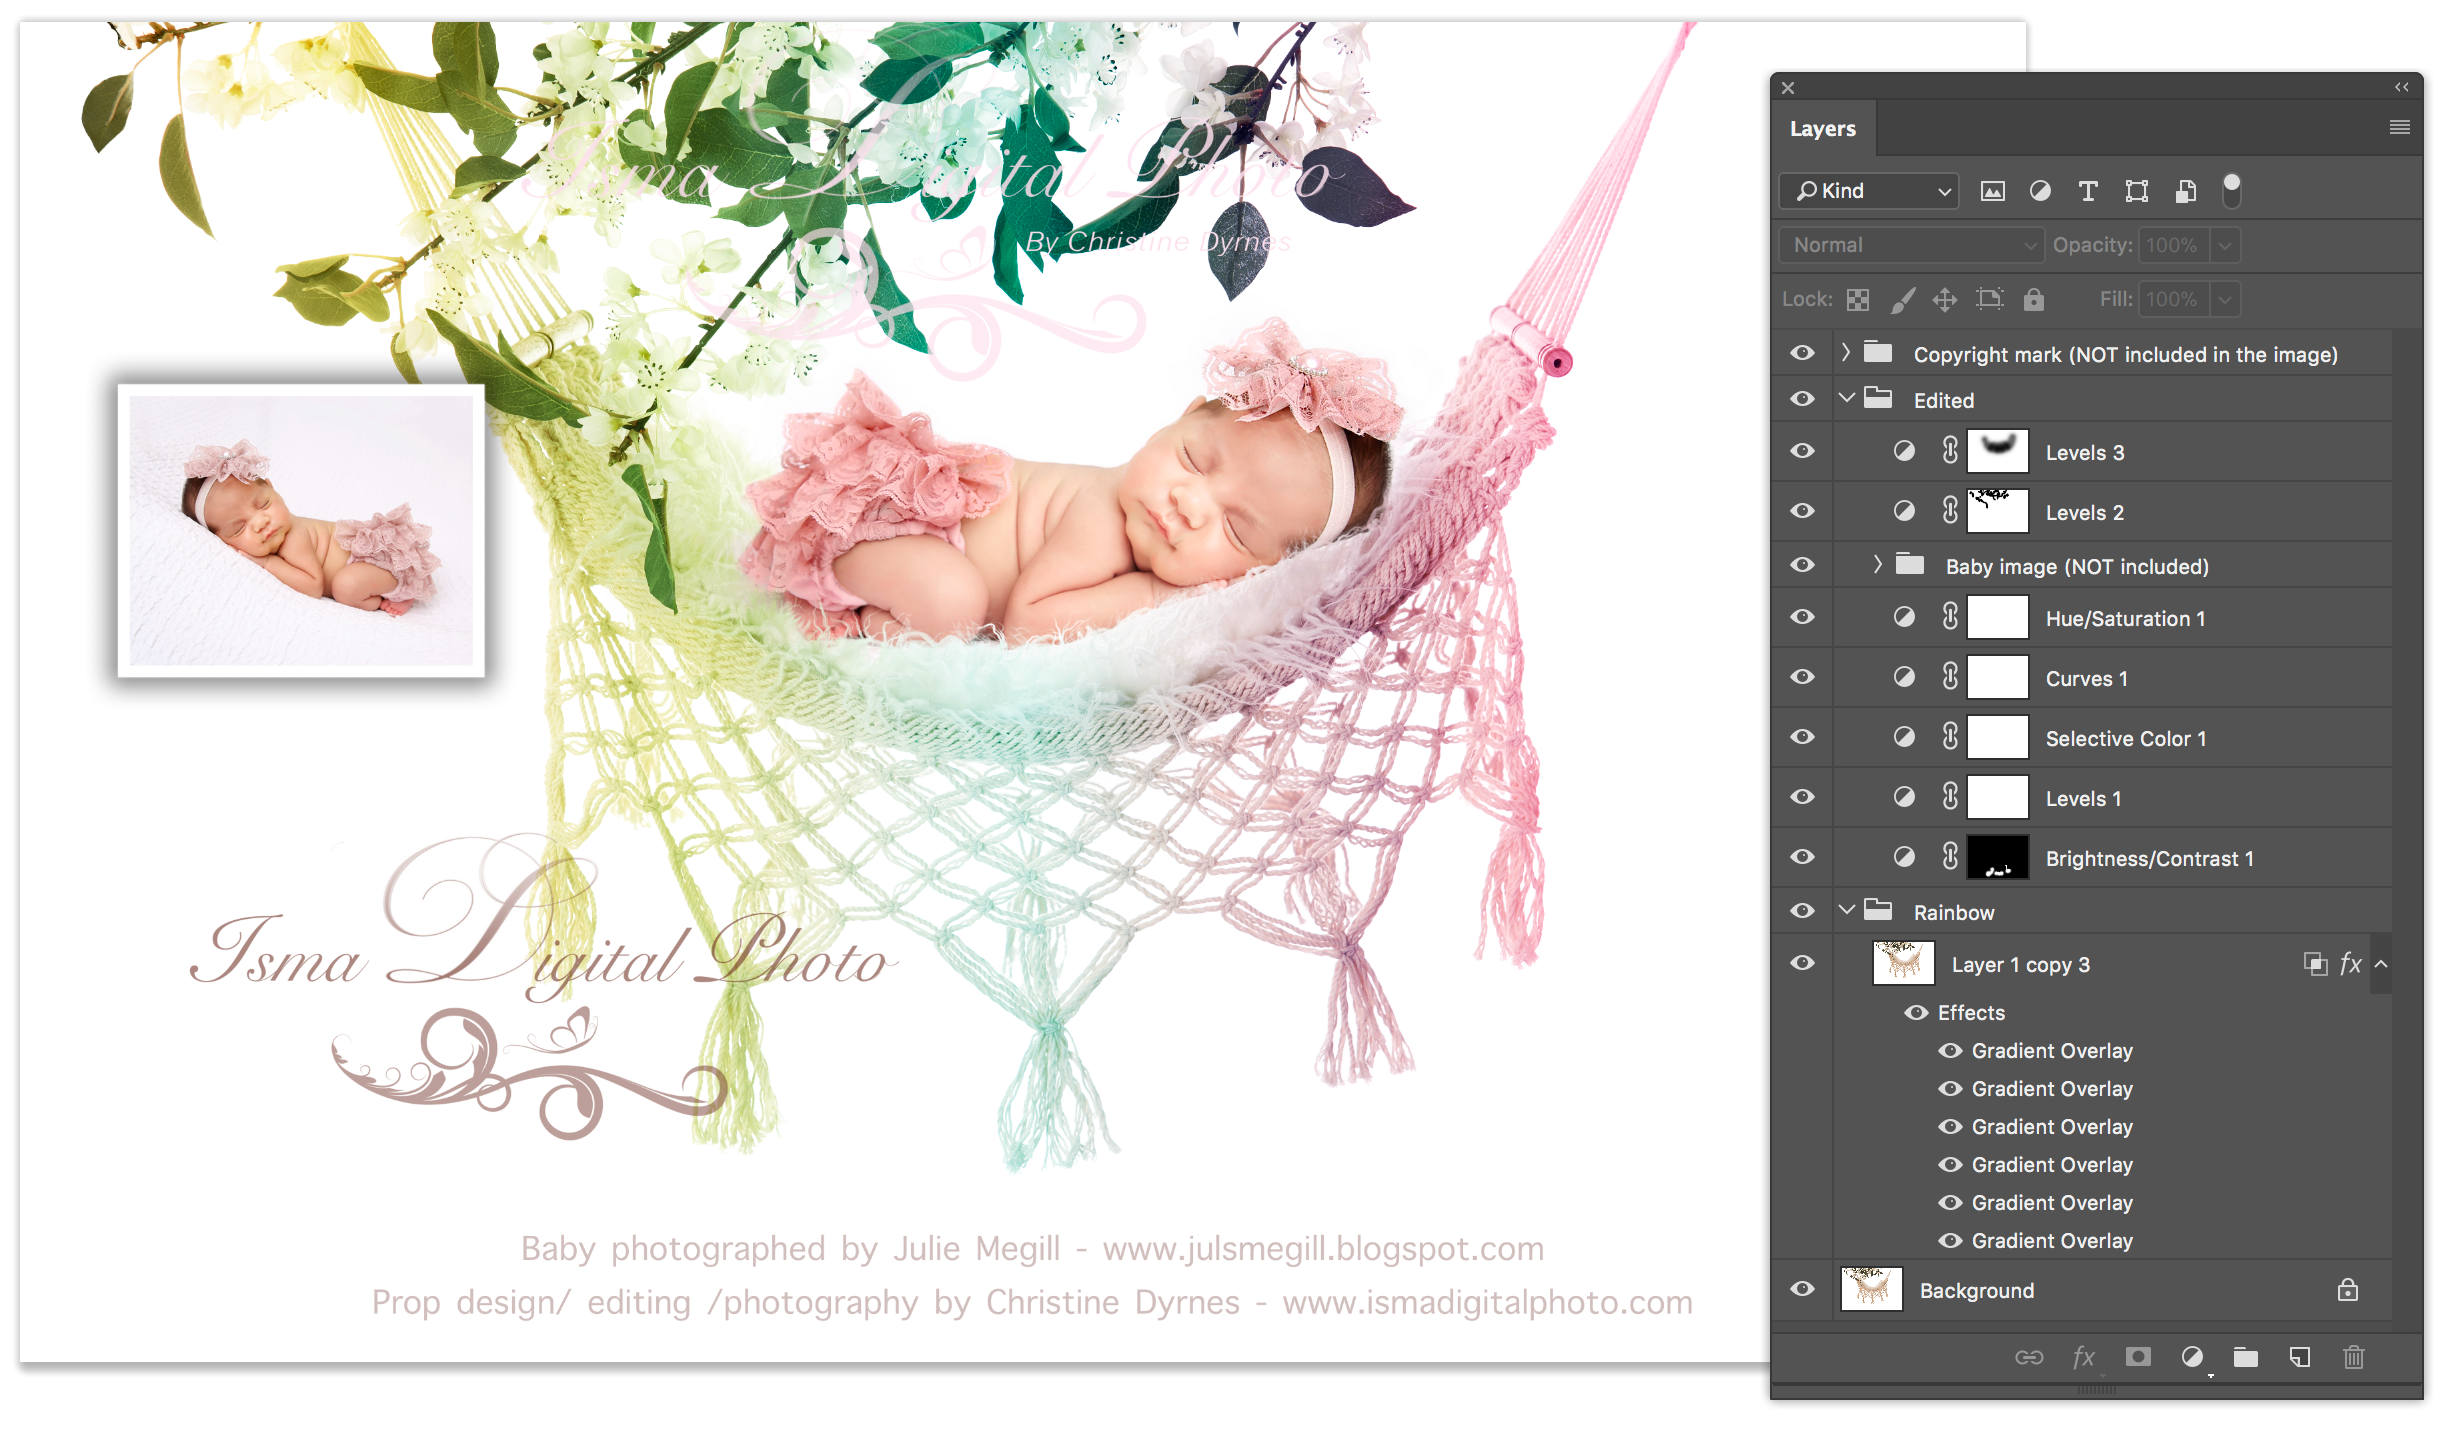 Hammock with pure white background and flowers  Digital Photography Backdrop /Props for Newborn Photography - High resolution digital backdrop - Two JPG and one PSD file with layers 